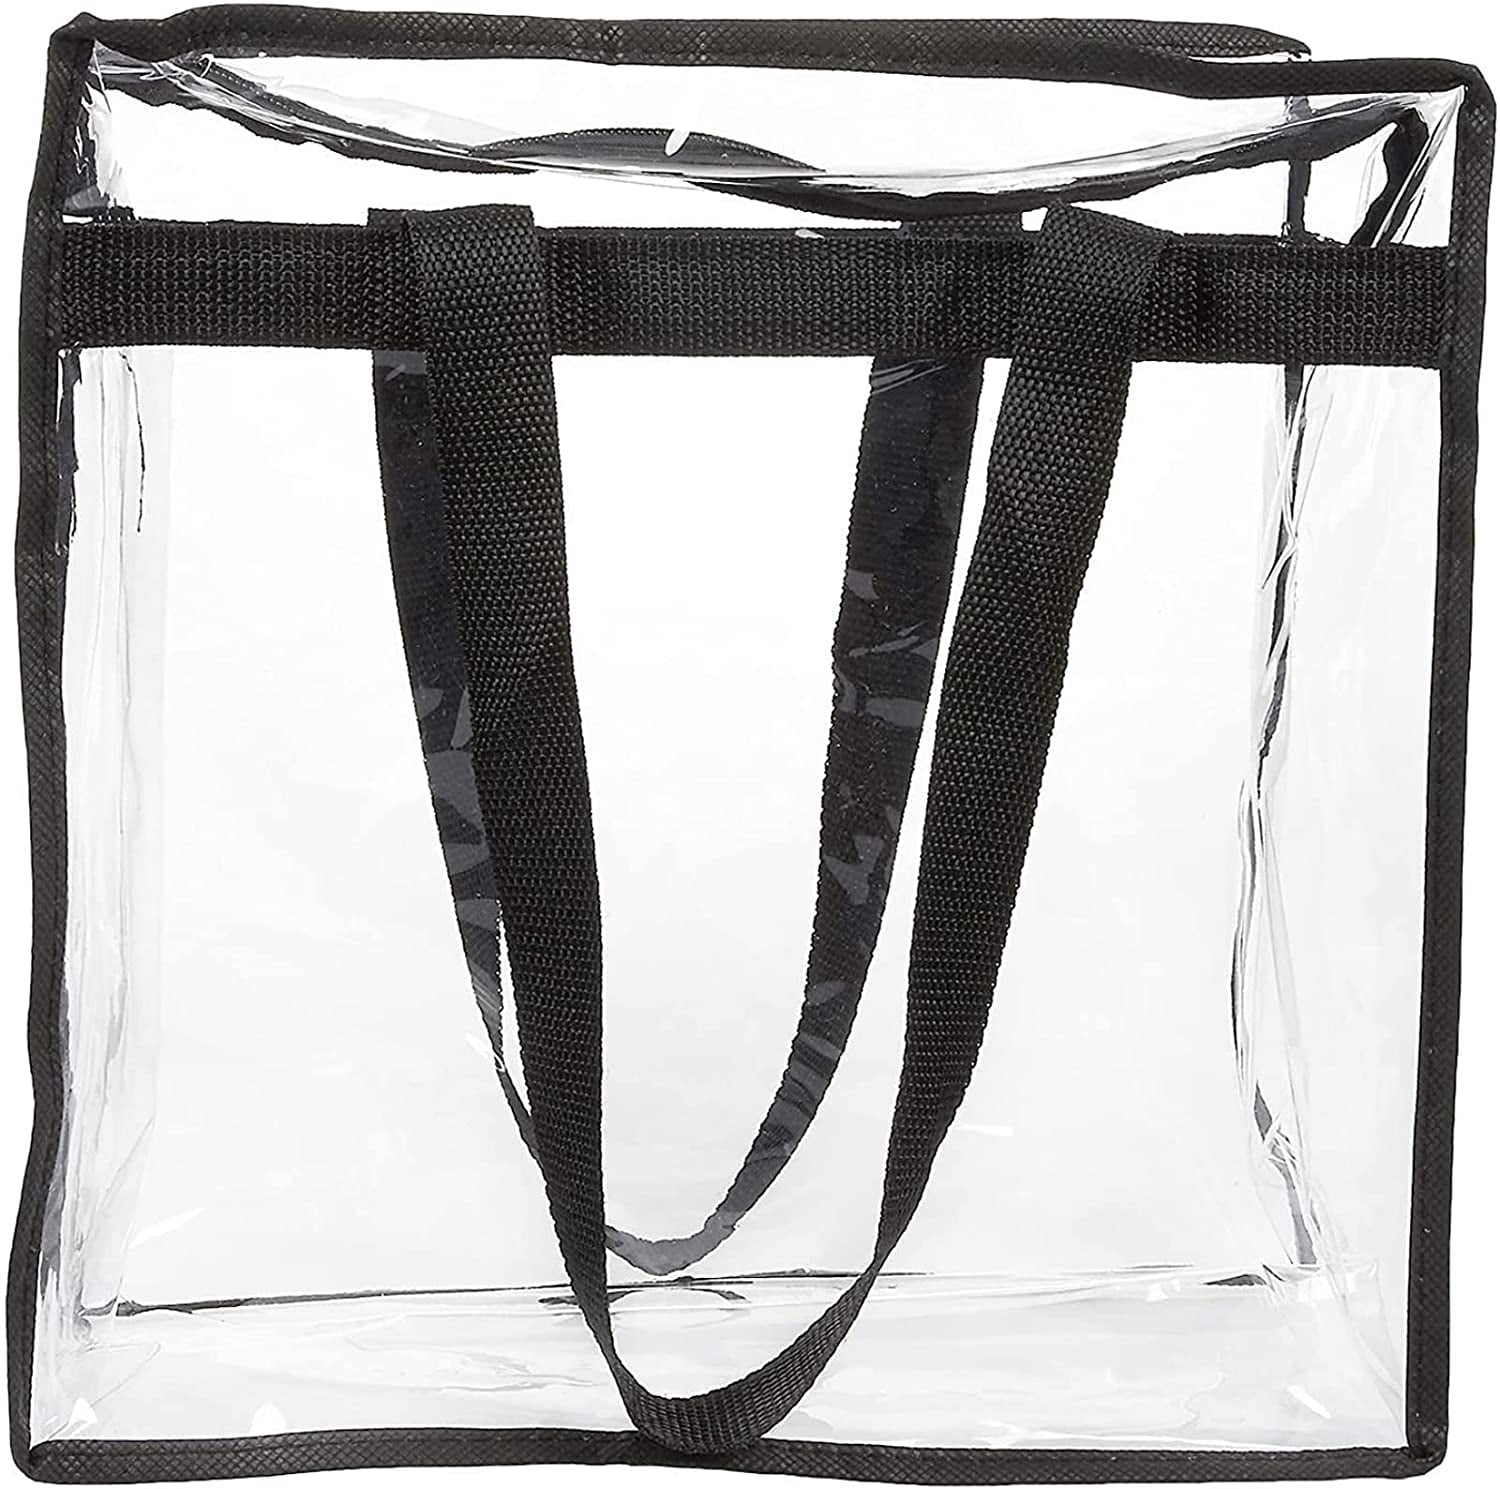 clear plastic tote,12x12x6,with6inch handles 